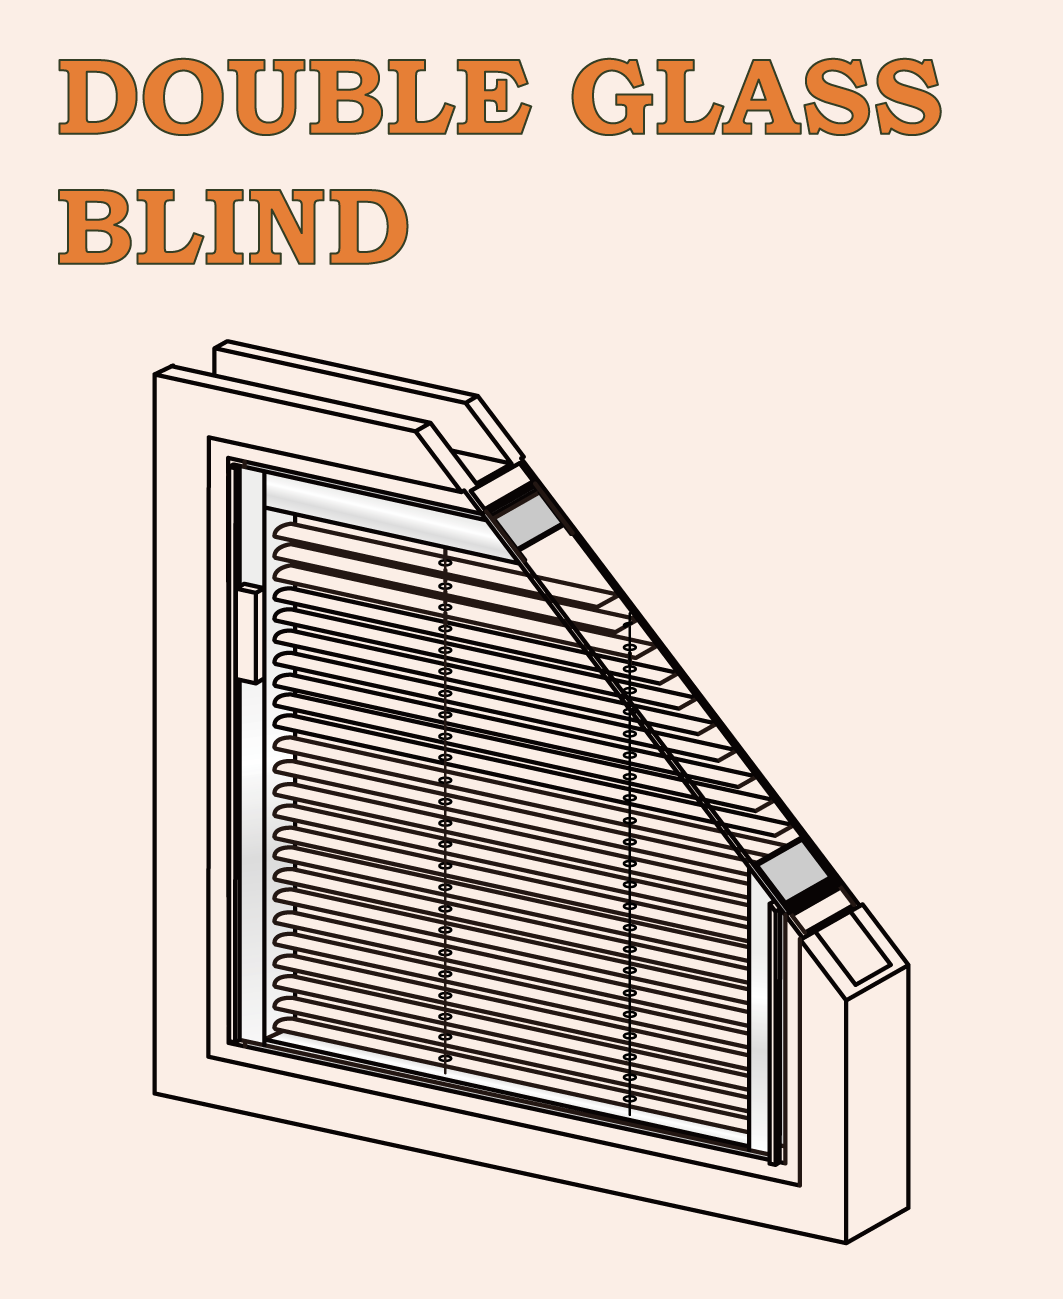 DOUBLE GLASS BLIND